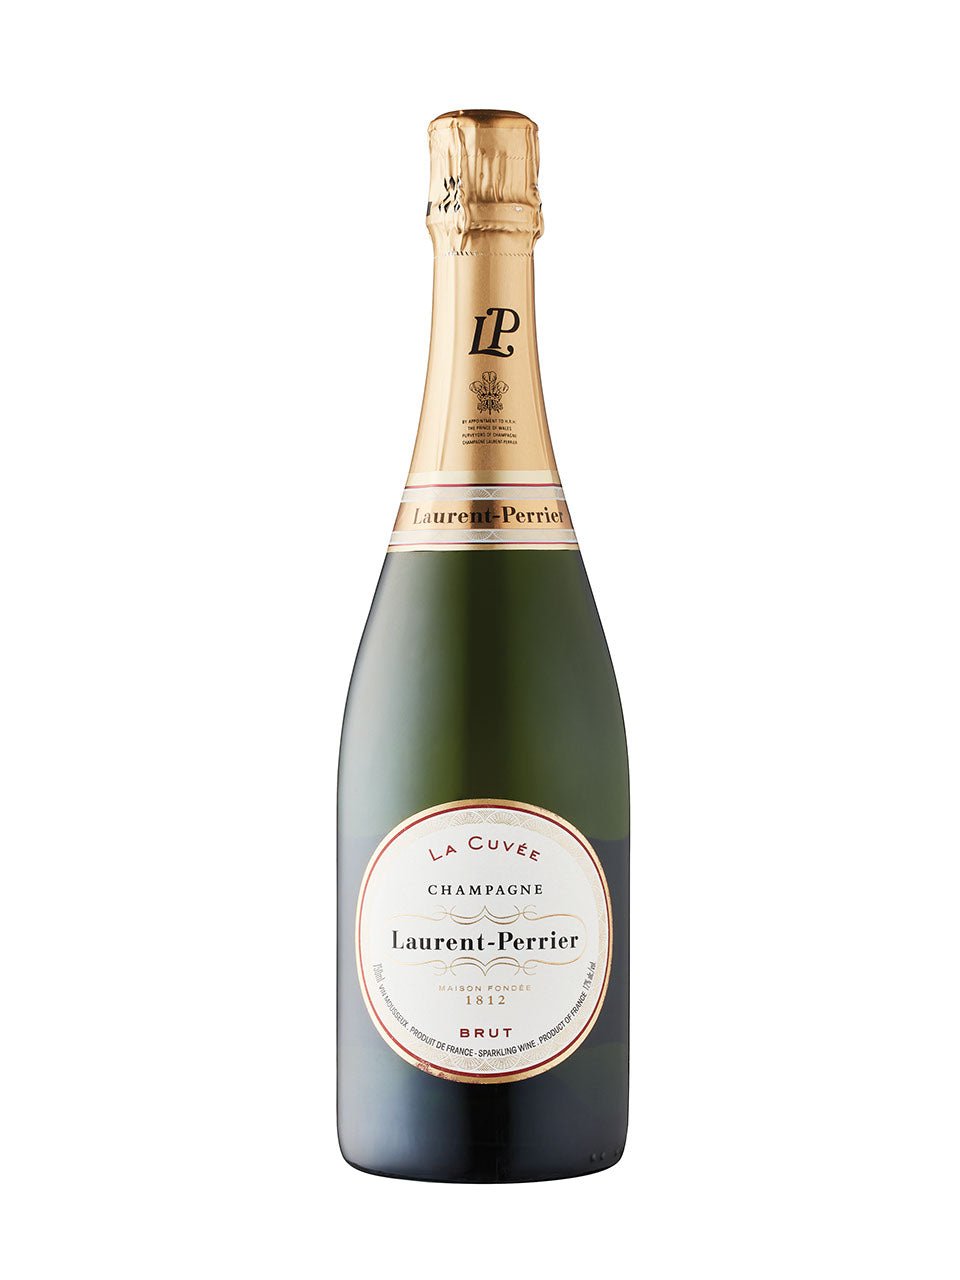 Laurent Perrier La Cuvée Brut Champagne | Exquisite Wine & Alcohol Gift Delivery Toronto Canada | Vyno